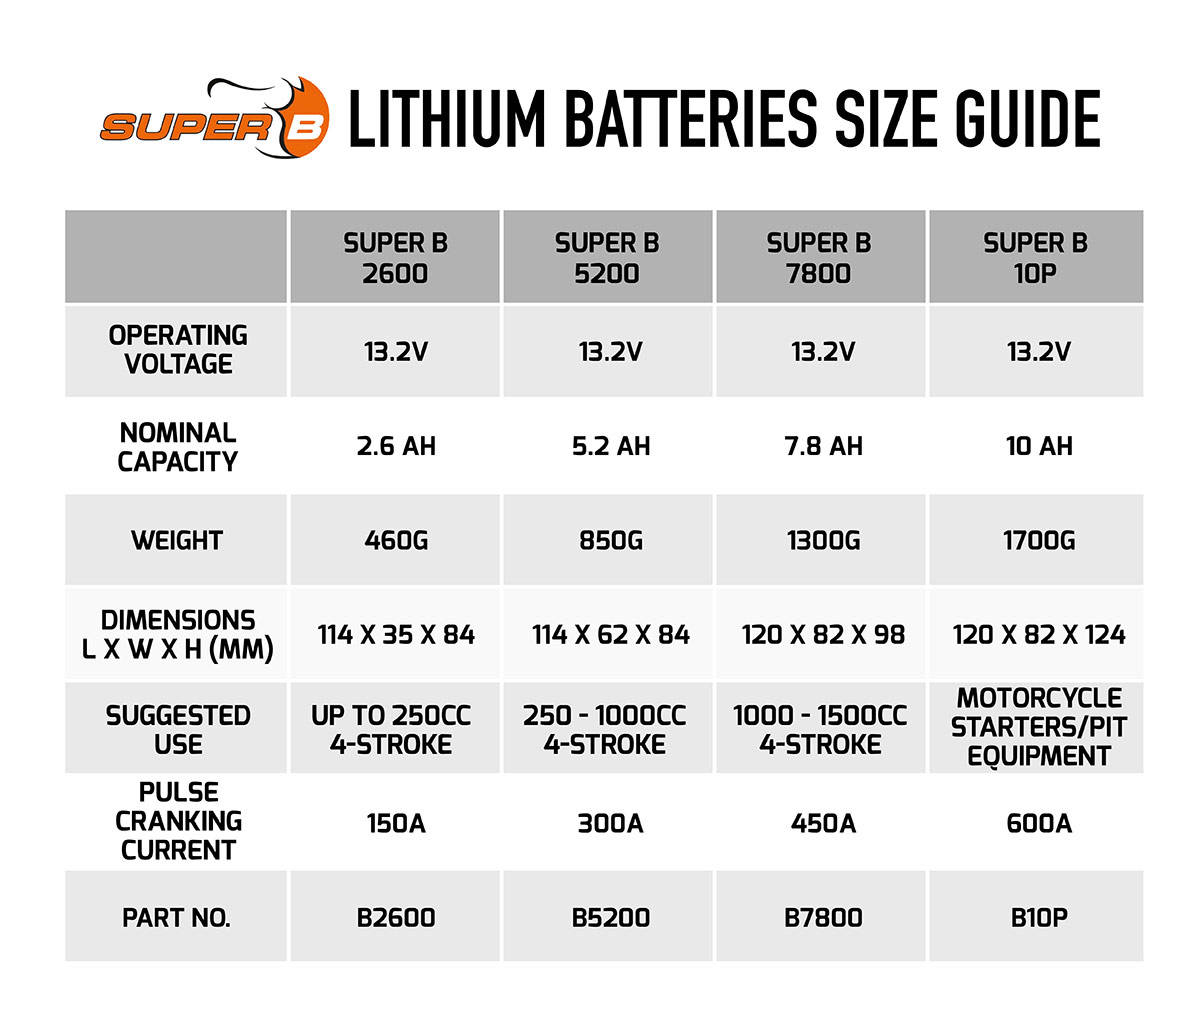 Lead Acid Battery Weight Chart